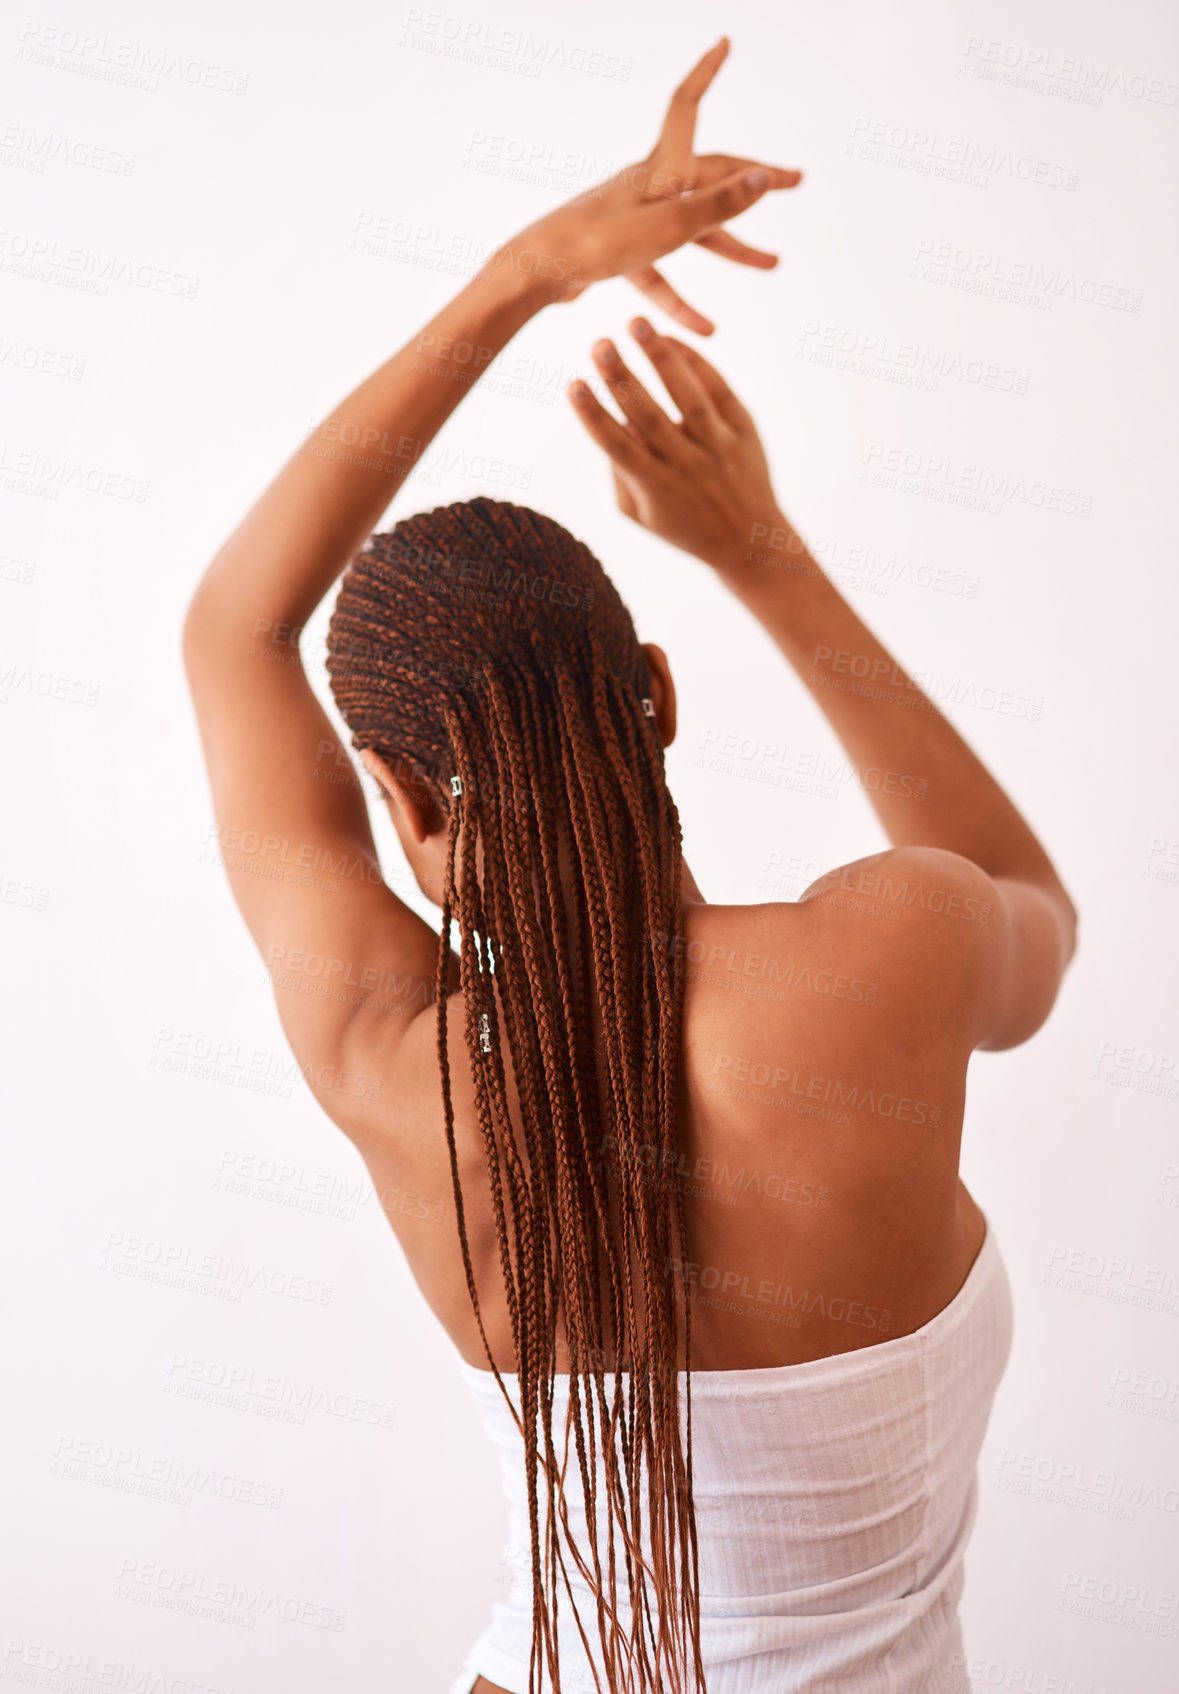 Buy stock photo Studio shot of a woman with braids posing with her back towards the camera